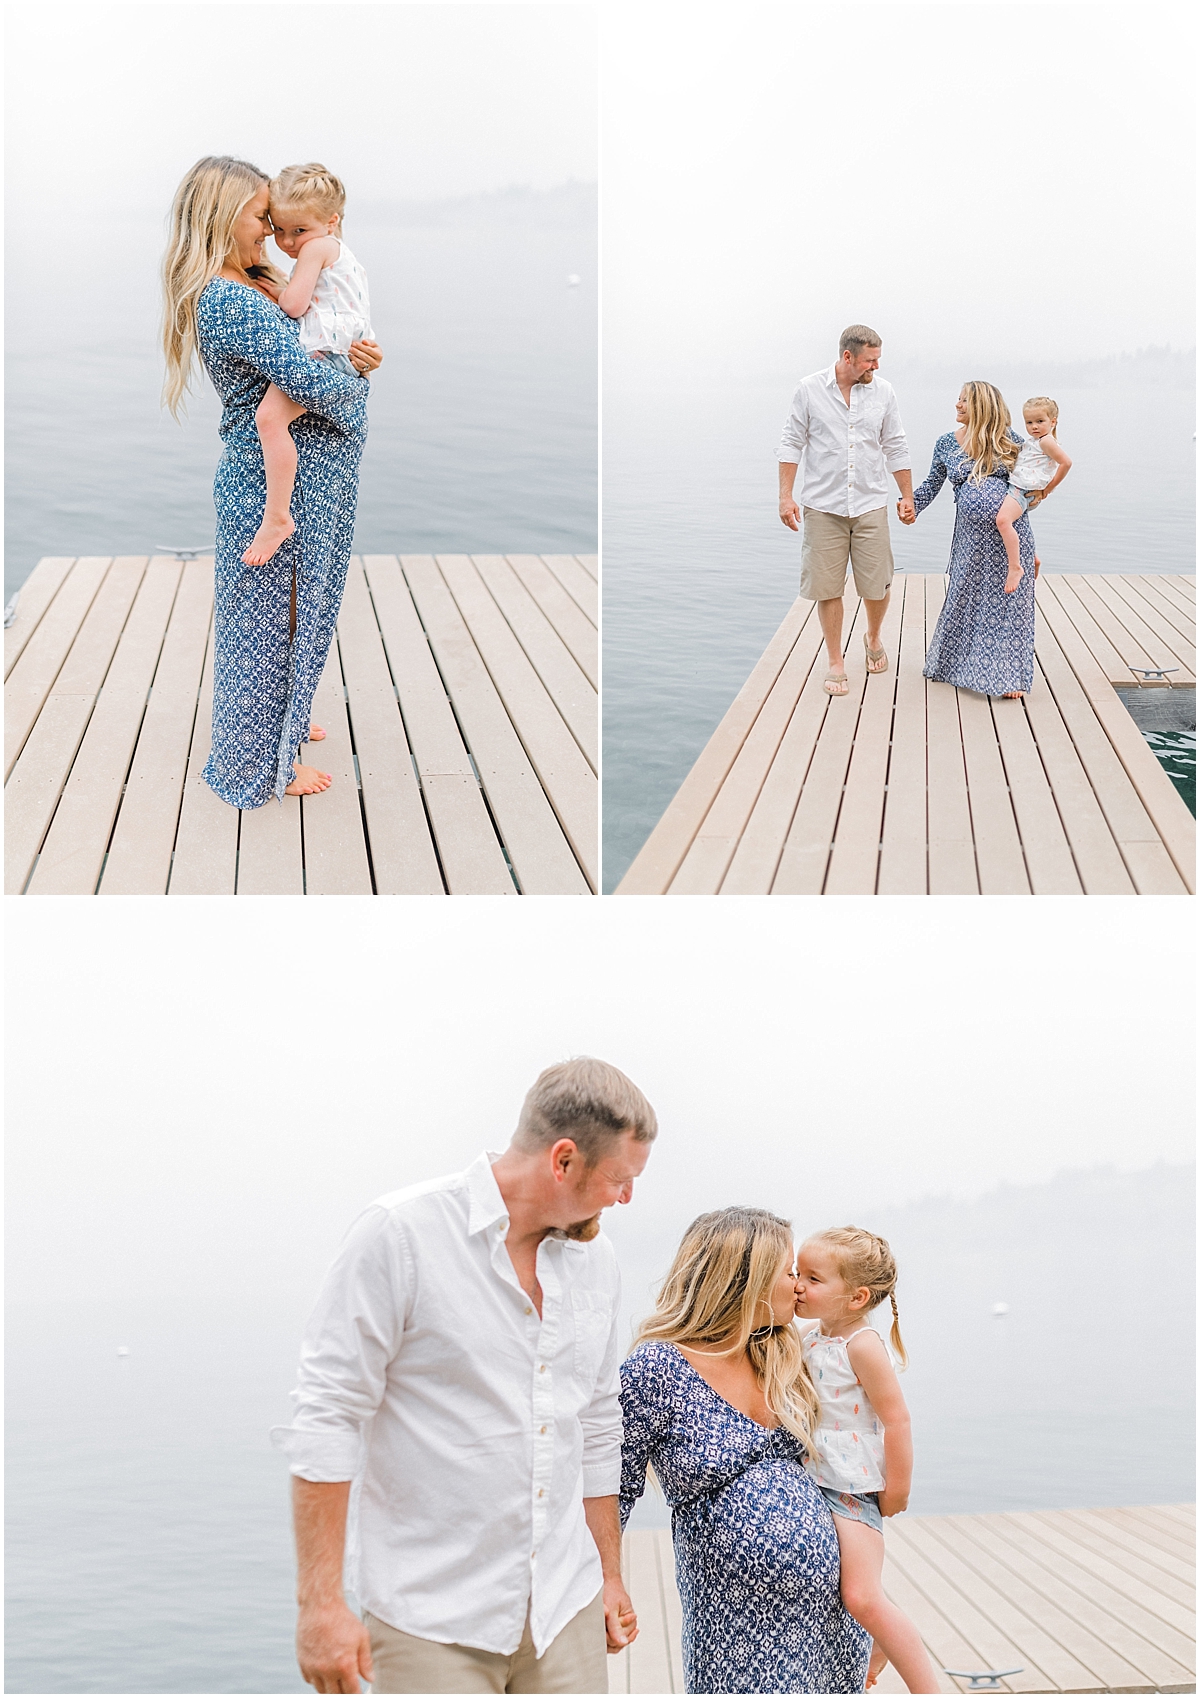 Emma Rose Company | PNW Family Portrait Photographer | Light and Airy Photography Style | What to Wear to Family Pictures | Kindred Presets | Lake Chelan Wedding Portrait Photographer_0104.jpg